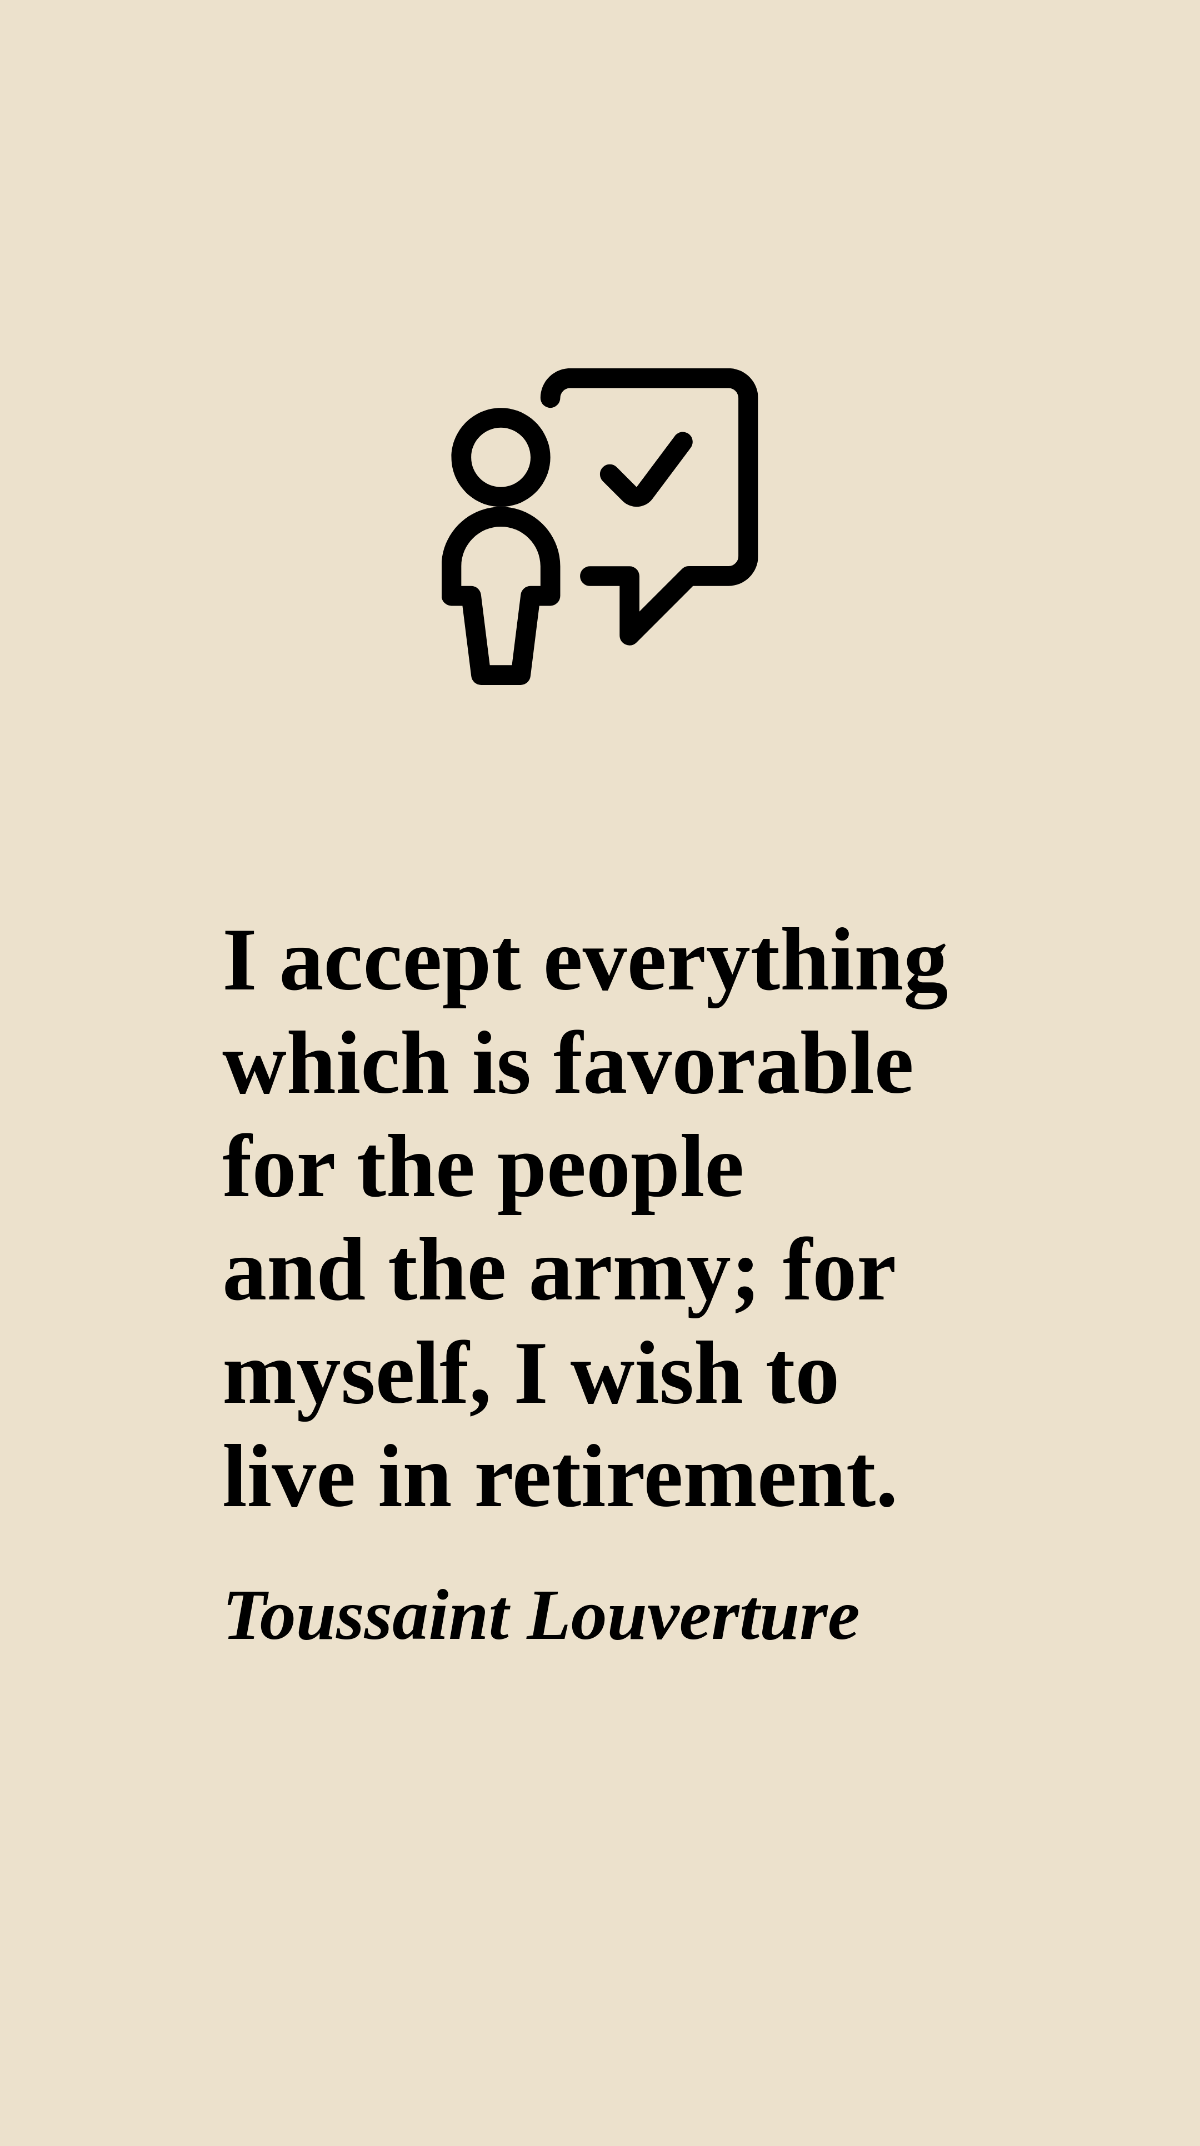 Free Toussaint Louverture - I accept everything which is favorable for the people and the army; for myself, I wish to live in retirement. Template